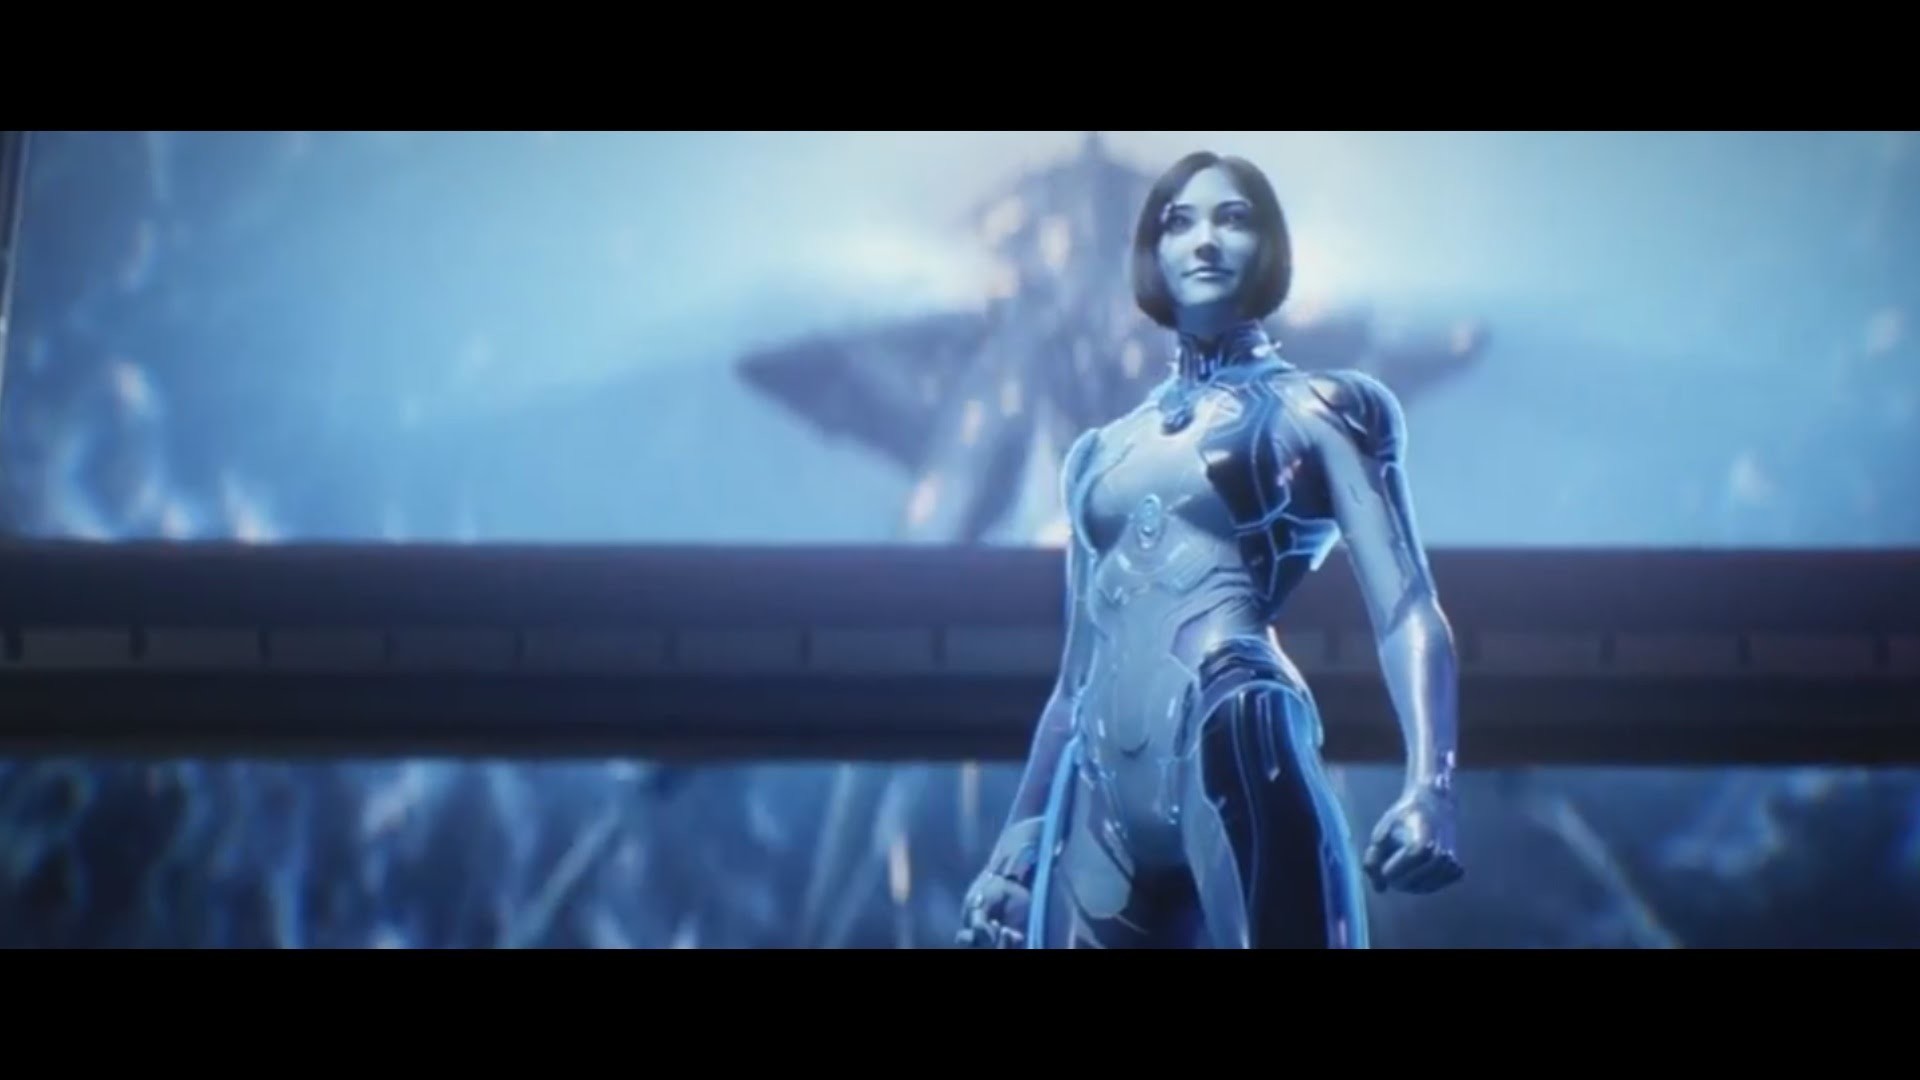 Cortana Wallpapers and Pictures - download for free 1920x1080.